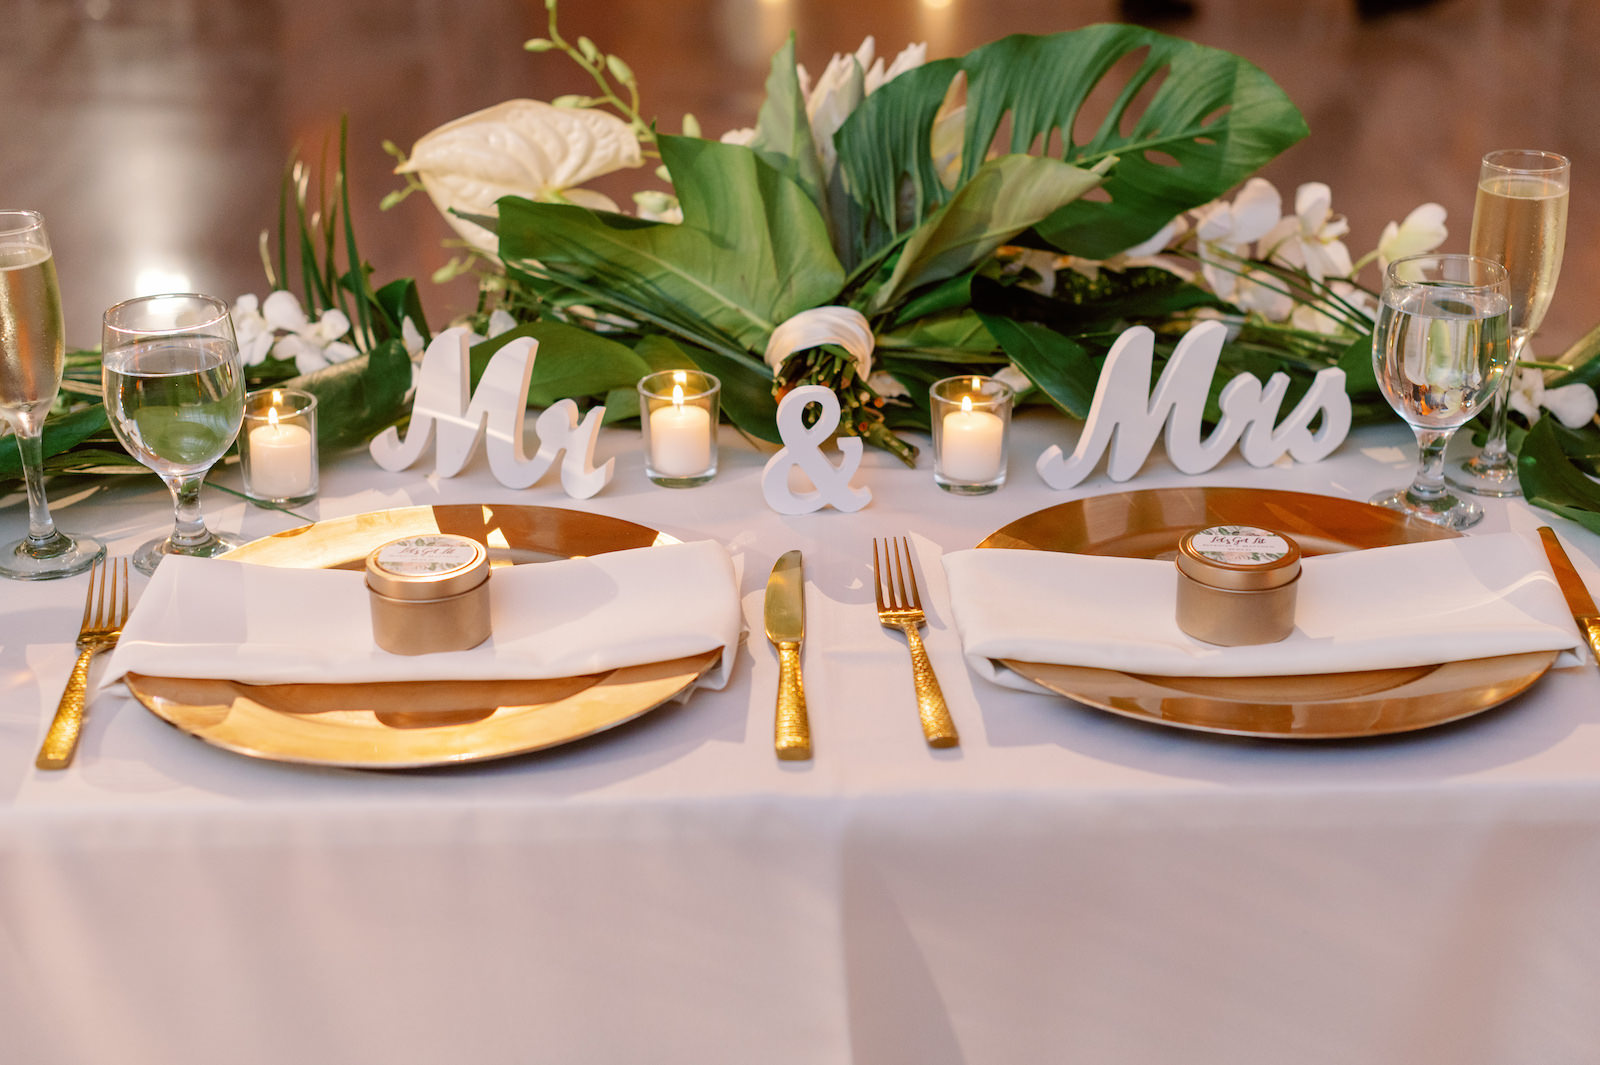 White and Green Modern Minimalist Tropical Wedding Reception Decor, Gold Chargers and Flatware, Wooden Mr and Mrs Laser Cut Words, Monstera Palm Leaves, White Anthurium, Orchids, King Protea Floral Arrangements | Tampa Bay Wedding Planner Taylored Affairs